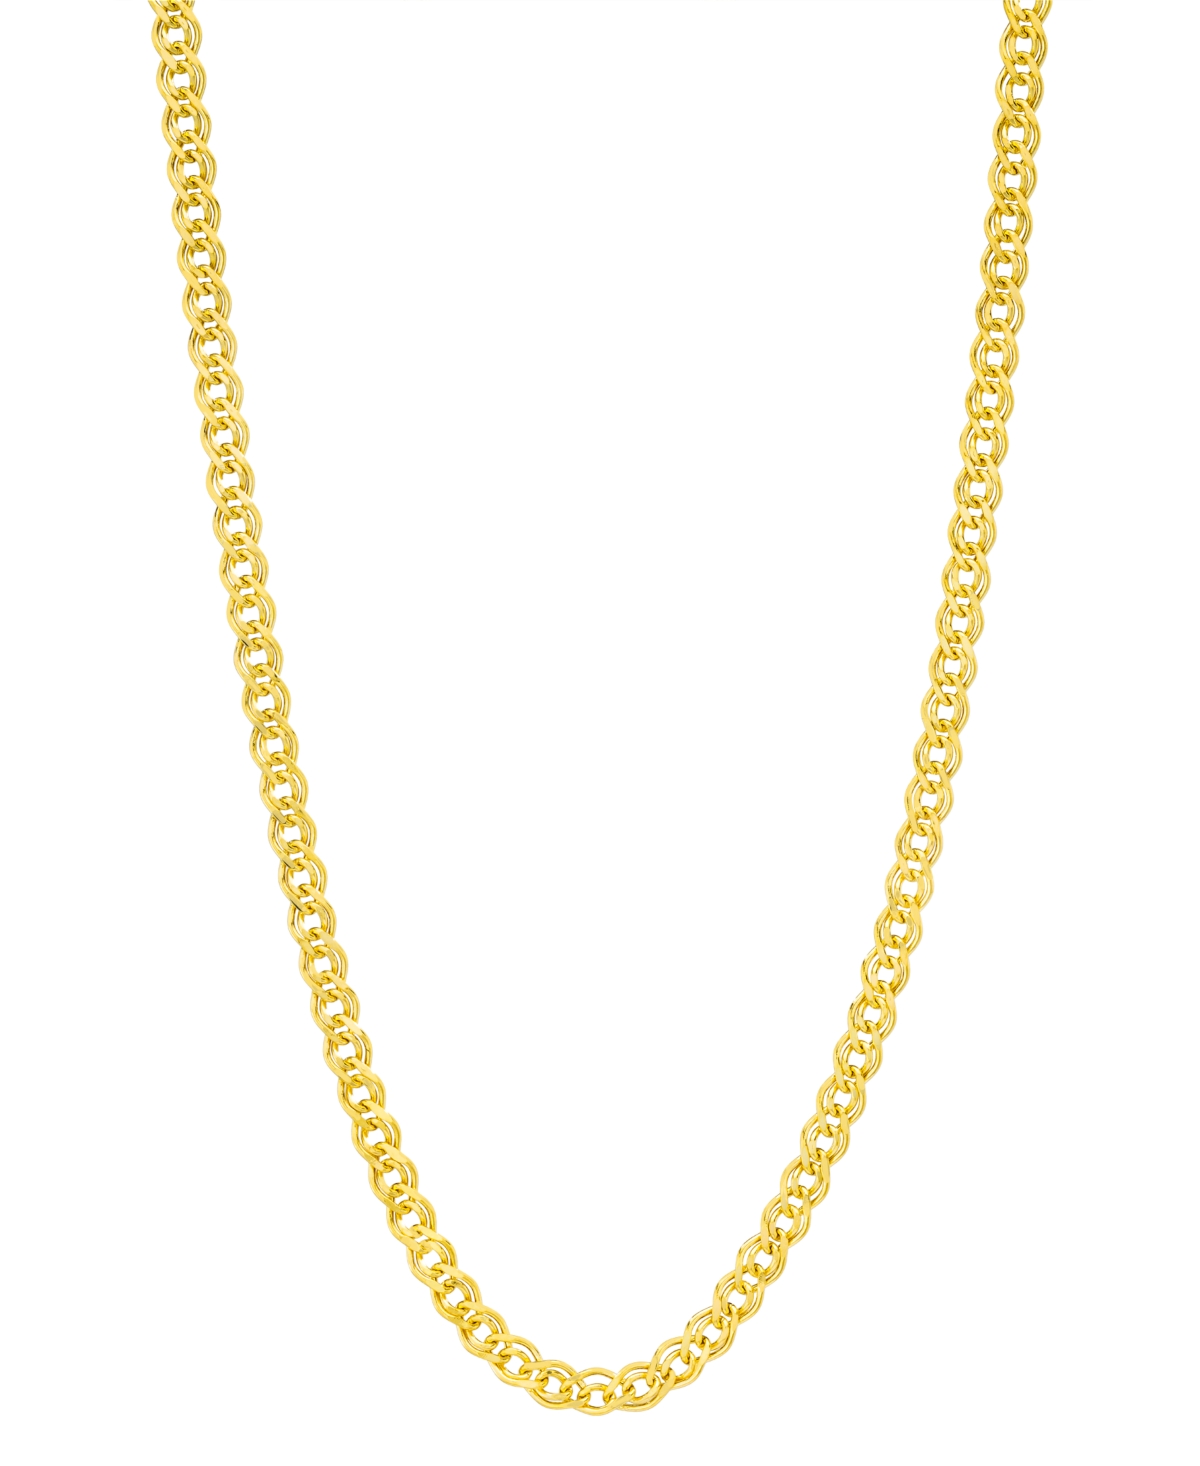 20" Nonna Link Chain Necklace (3-3/4mm) in 14k Gold - Yellow Gold